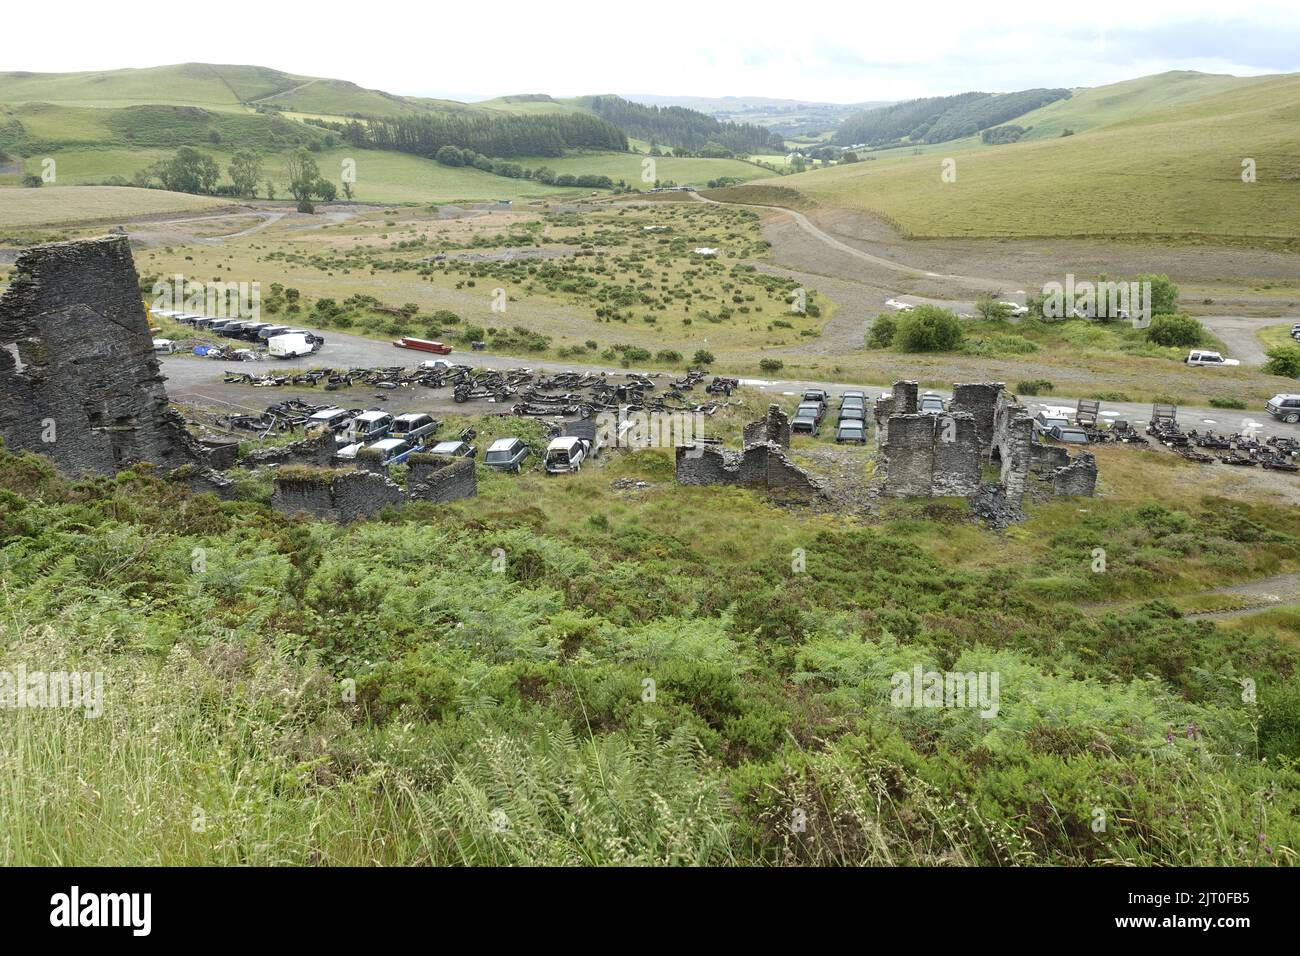 Large numbers of used Range Rovers on dismantling site in remote countryside near Trisant West Wales UK Stock Photo